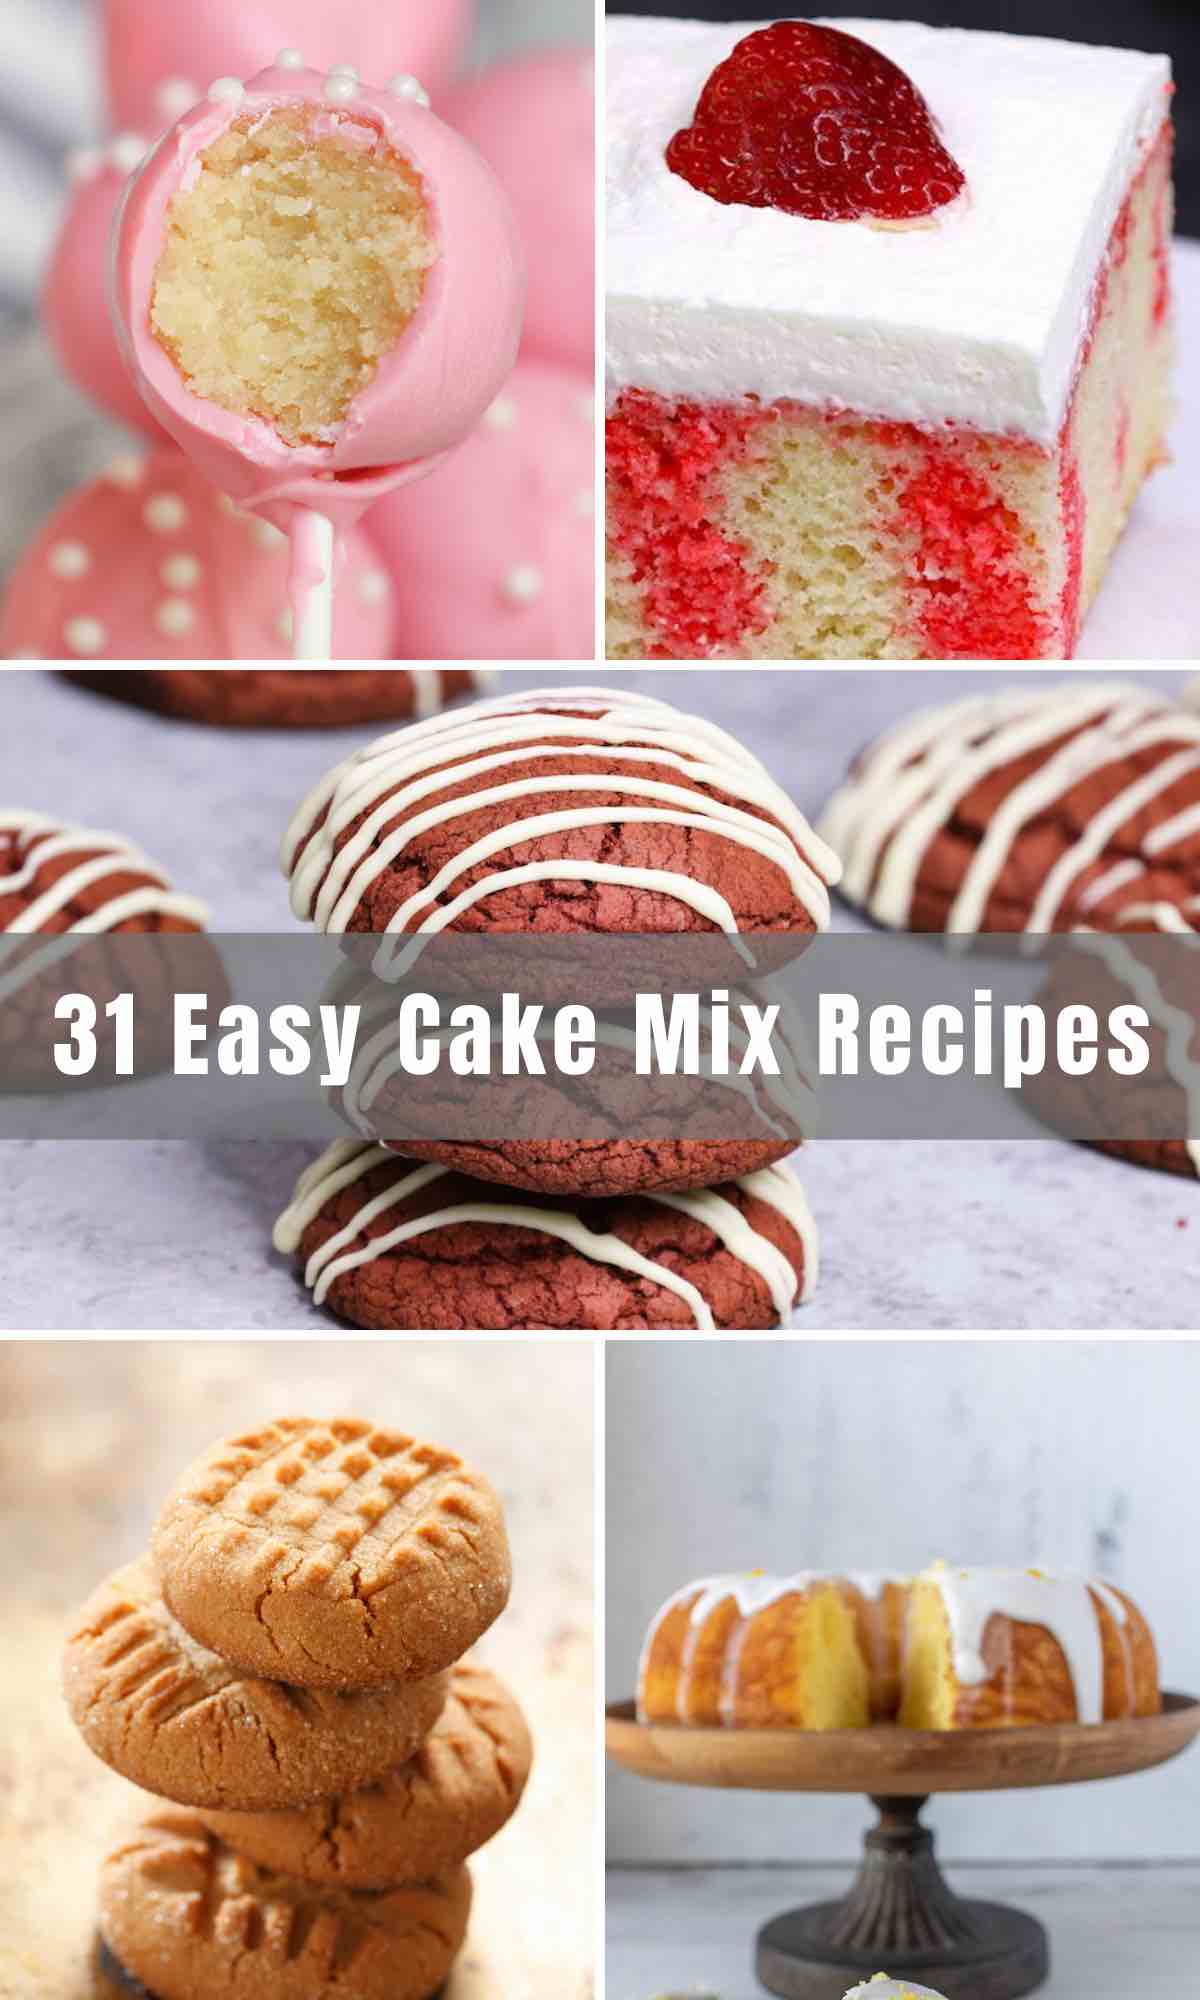 With boxed cake mix, you can make so many delicious desserts beyond cakes. We've collected 31 of the Best Cake Mix Recipes, from cookies to bars and cake pops too - you’ll have plenty of options to choose from.